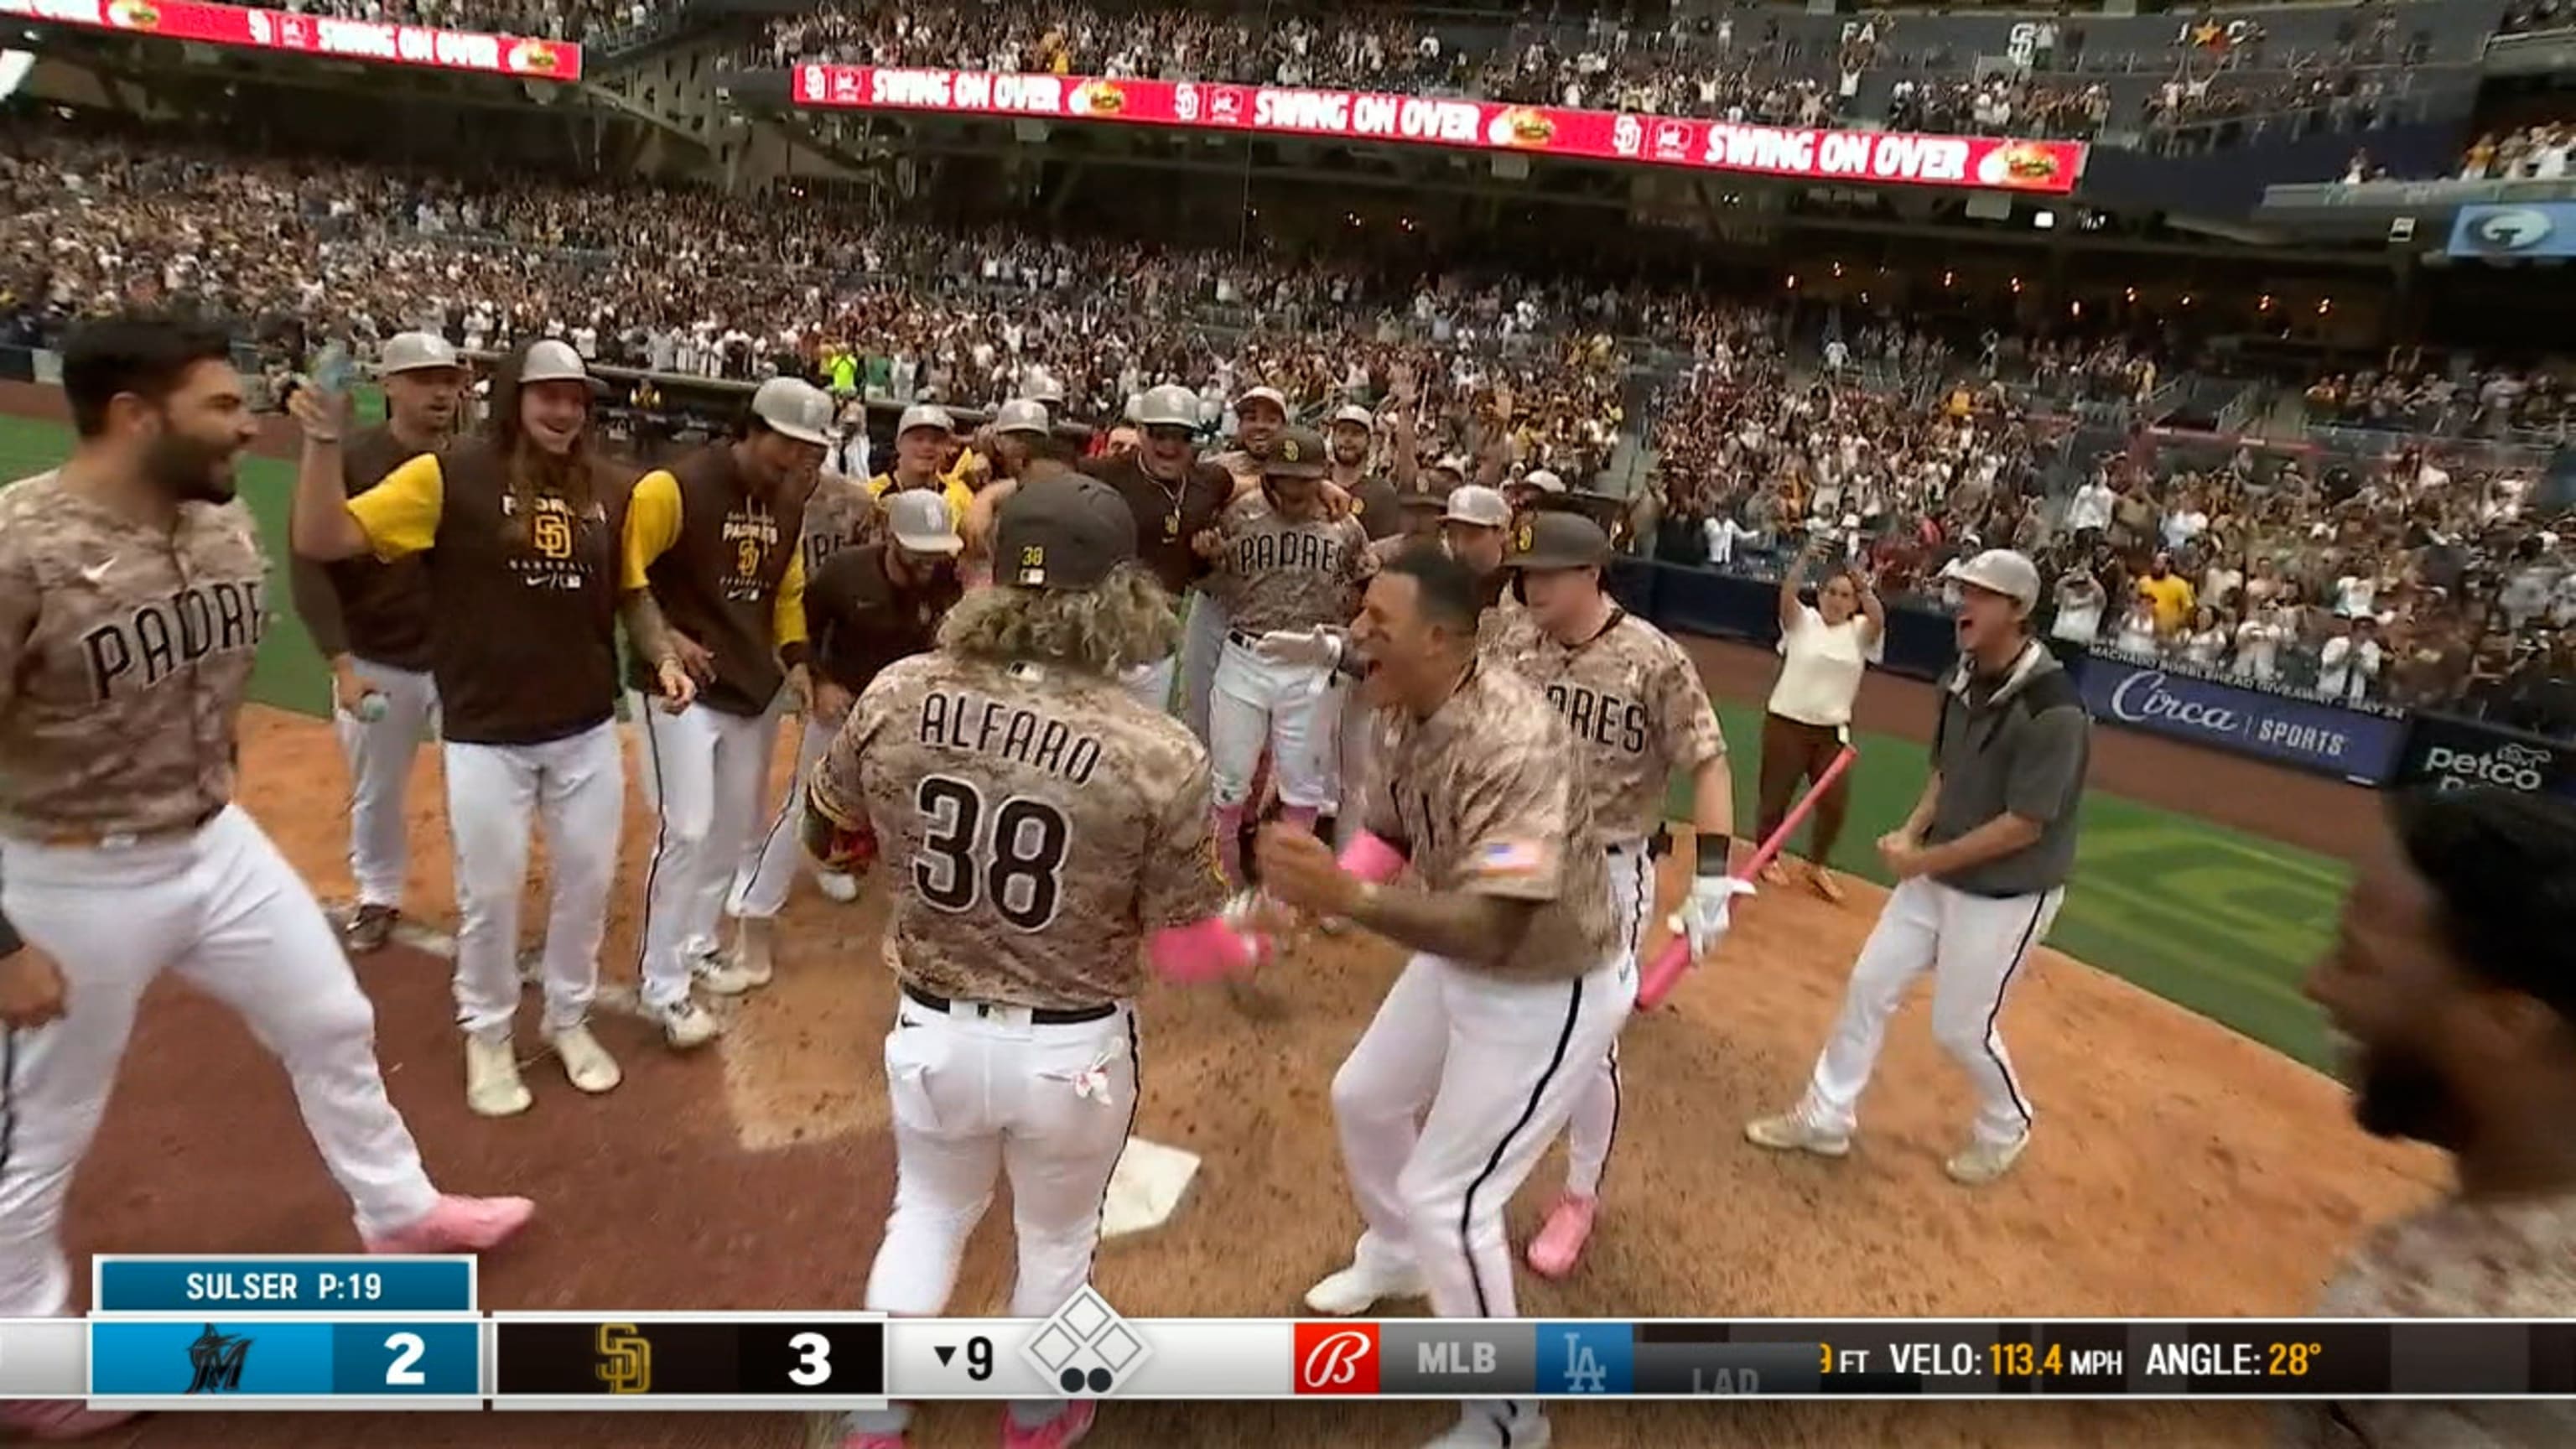 Alfaro mashes pinch-hit 3-run HR in 9th for 3-2 Padres win - NBC